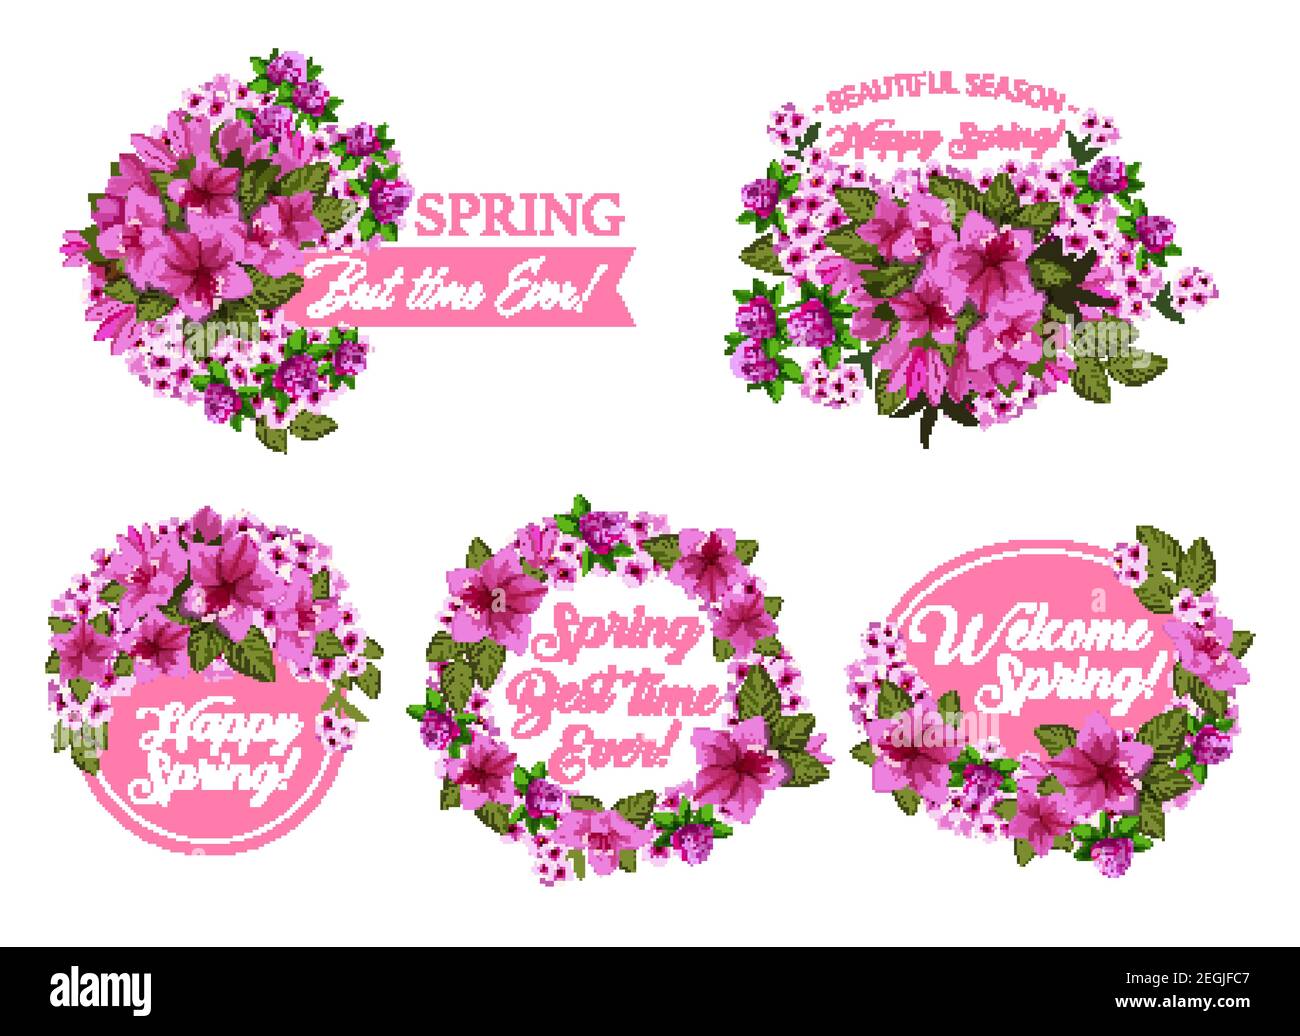 Spring season holiday icon with pink flower wreath and ribbon banner. Springtime blooming garden plant with clover, azalea and phlox blossom, green le Stock Vector